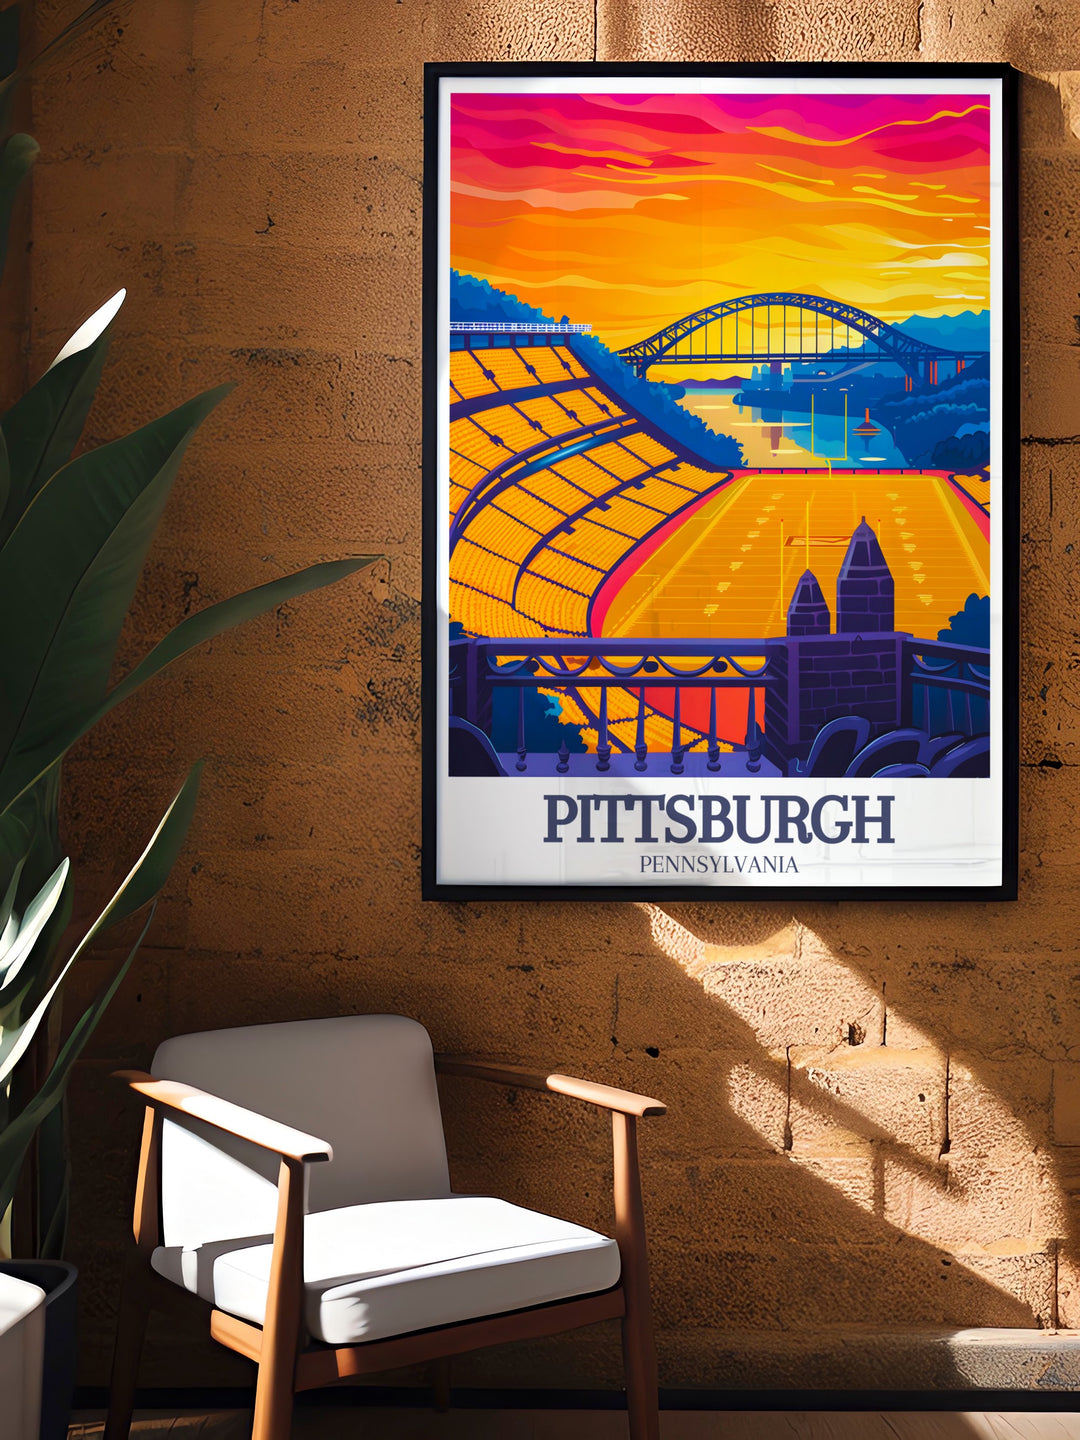 Bring the iconic landmarks of Pittsburgh into your home with a travel poster print of Fort Pitt Bridge and Heinz Field. This city color palette print offers a unique perspective on the citys architectural marvels